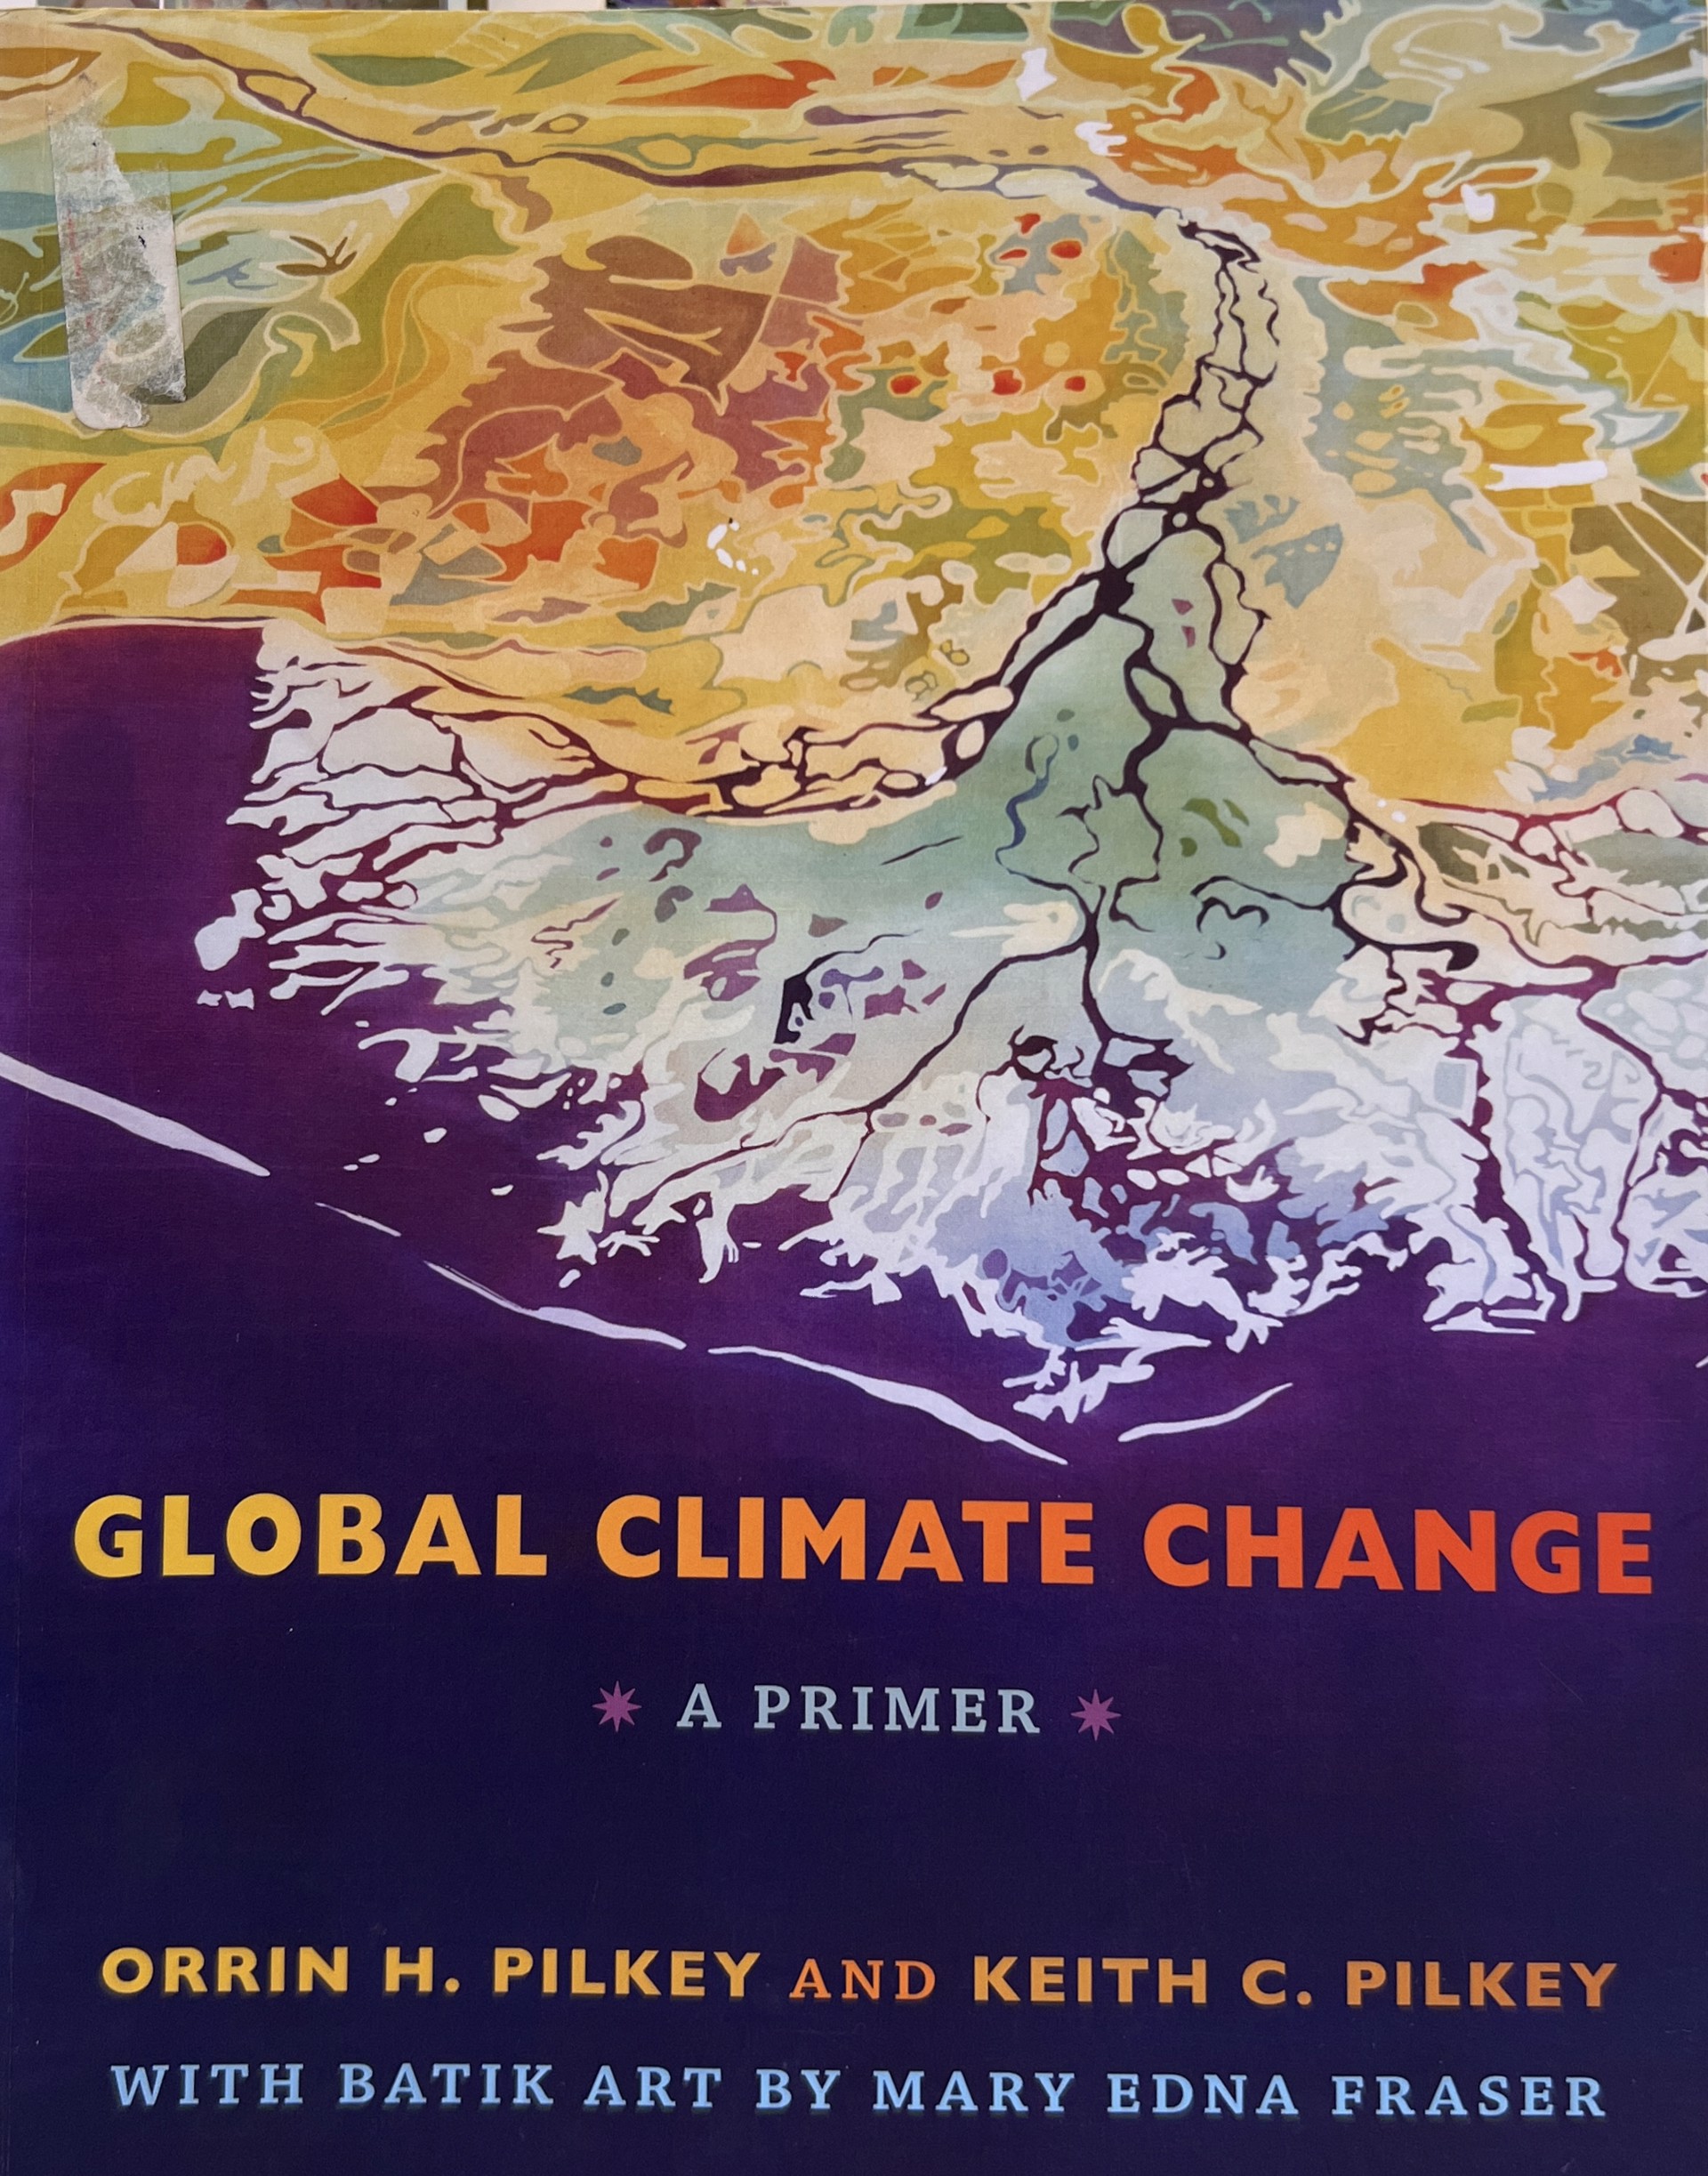 Global Climate Change: A Primer by Orrin H. Pilkey and Keith C. Pilkey by Mary Edna Fraser